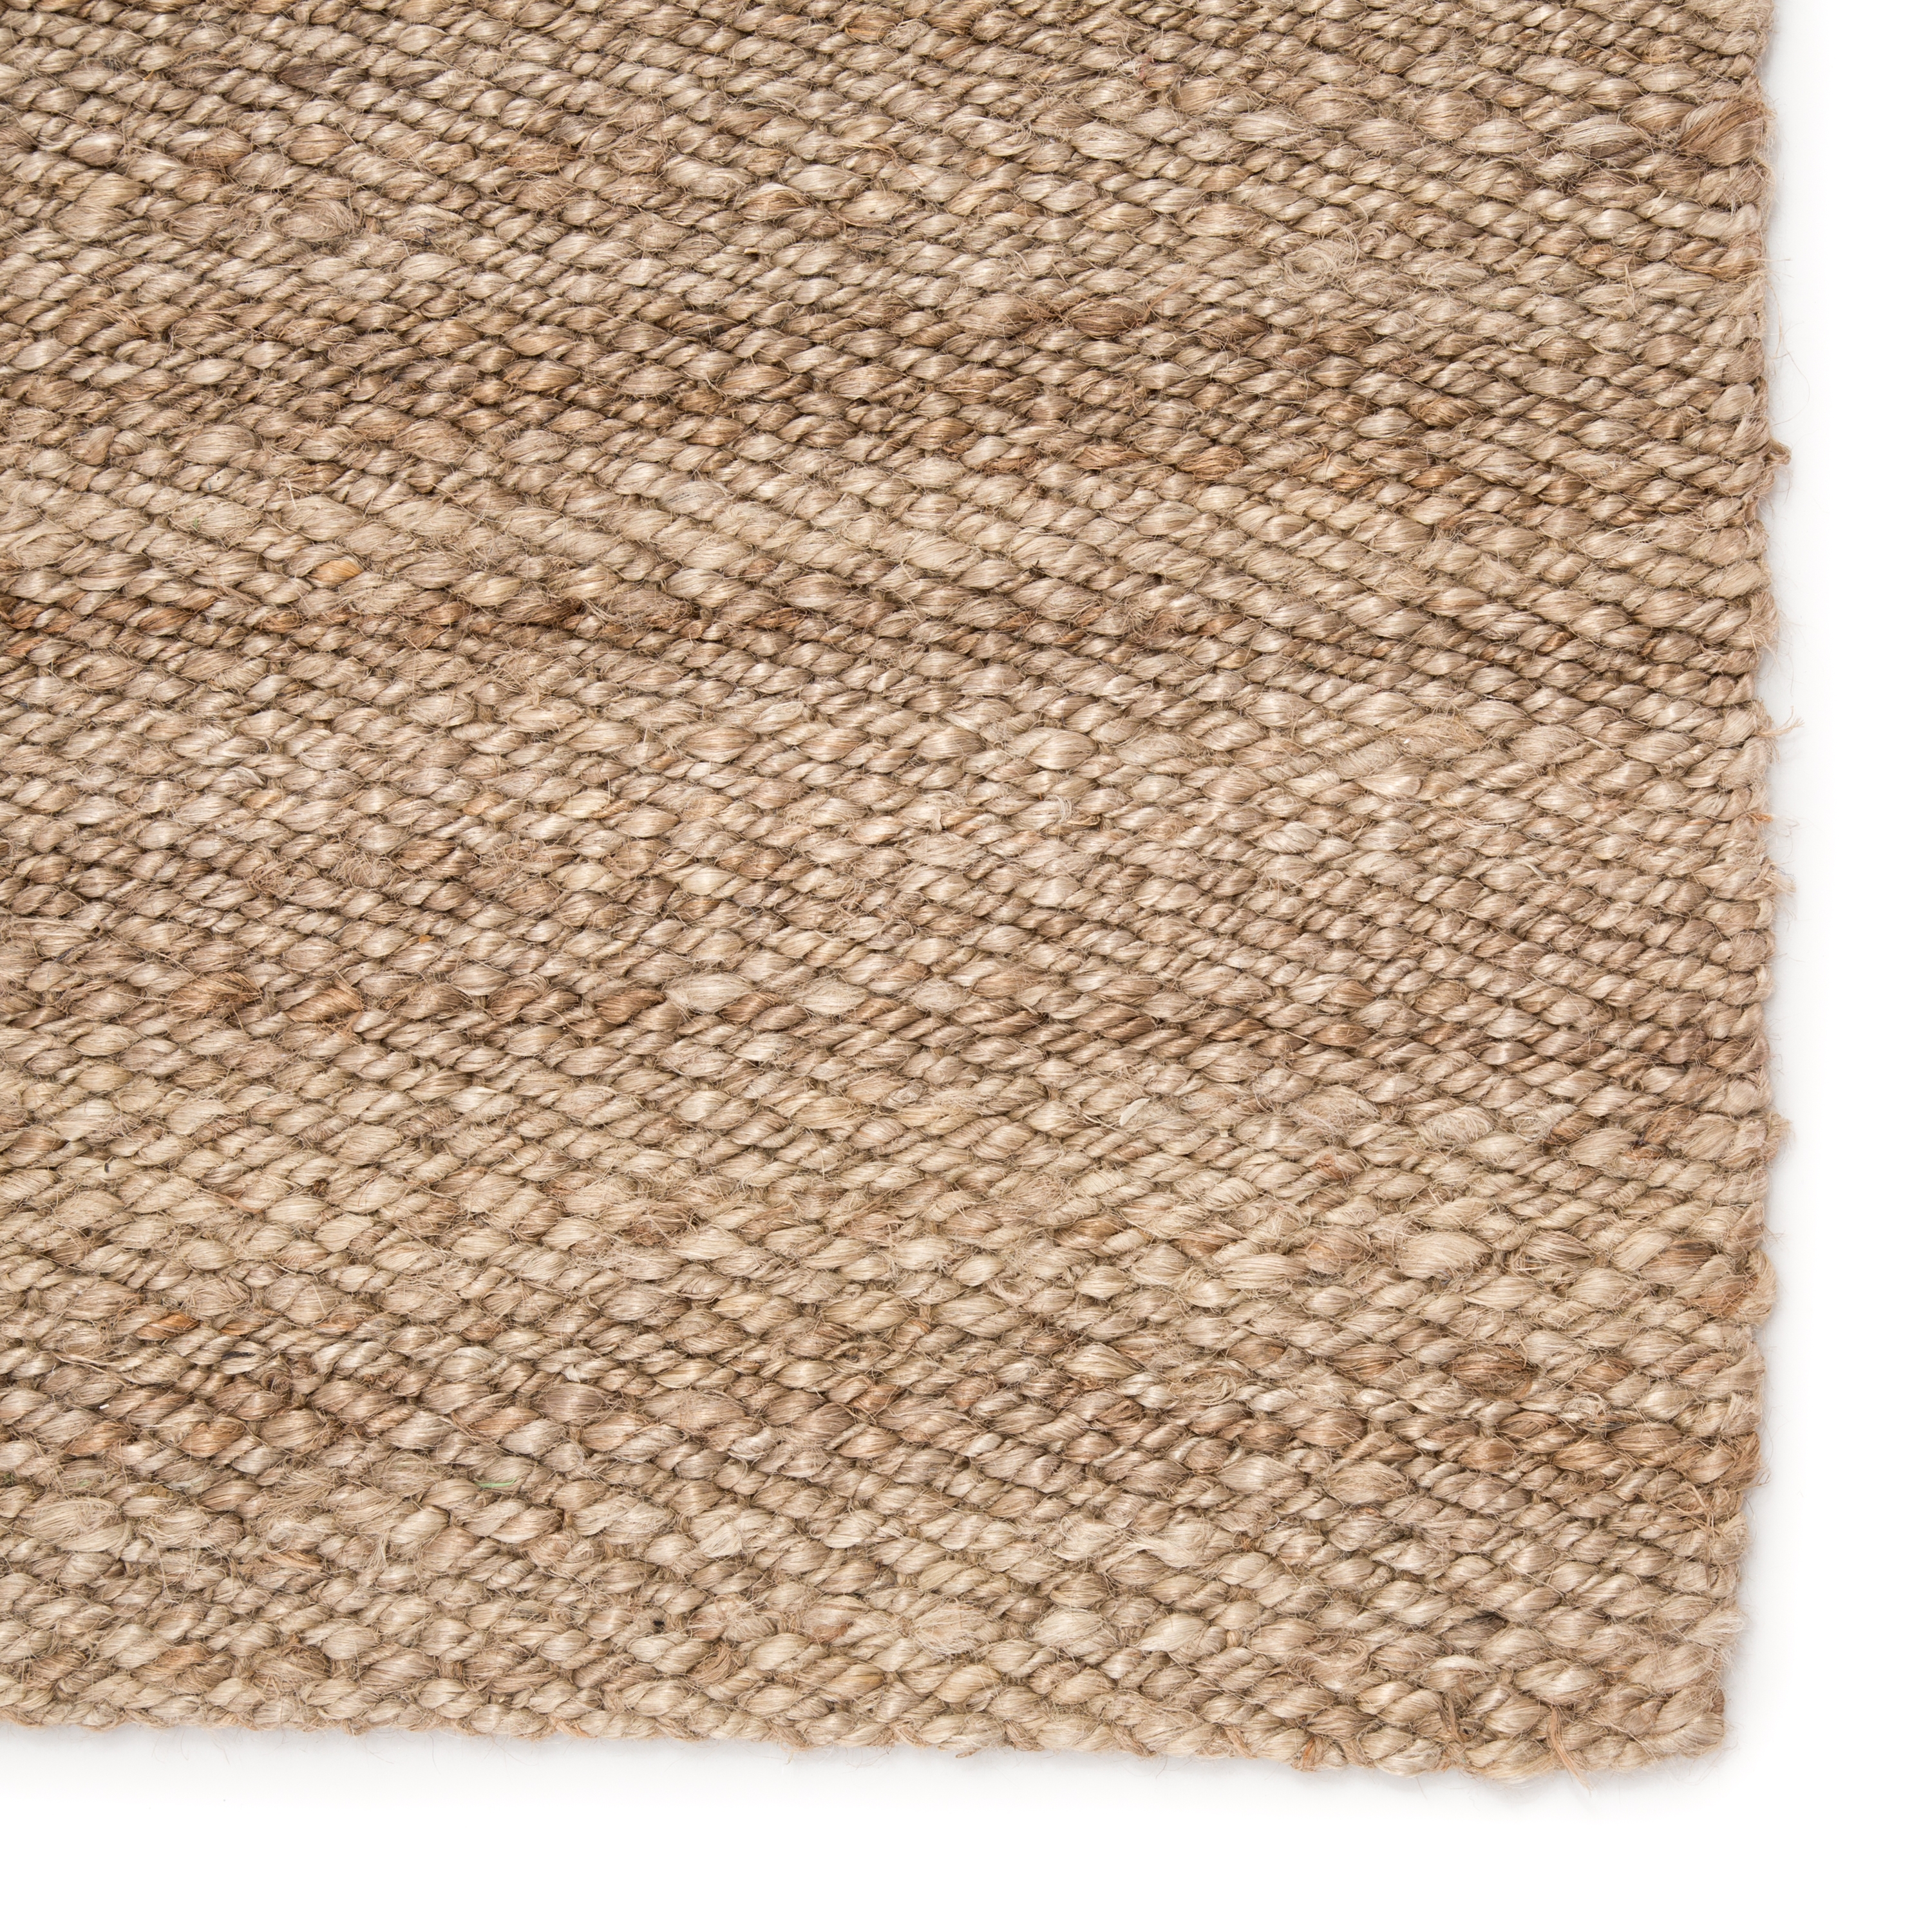 Hilo Natural Solid Tan Area Rug (5'X8') - Image 3